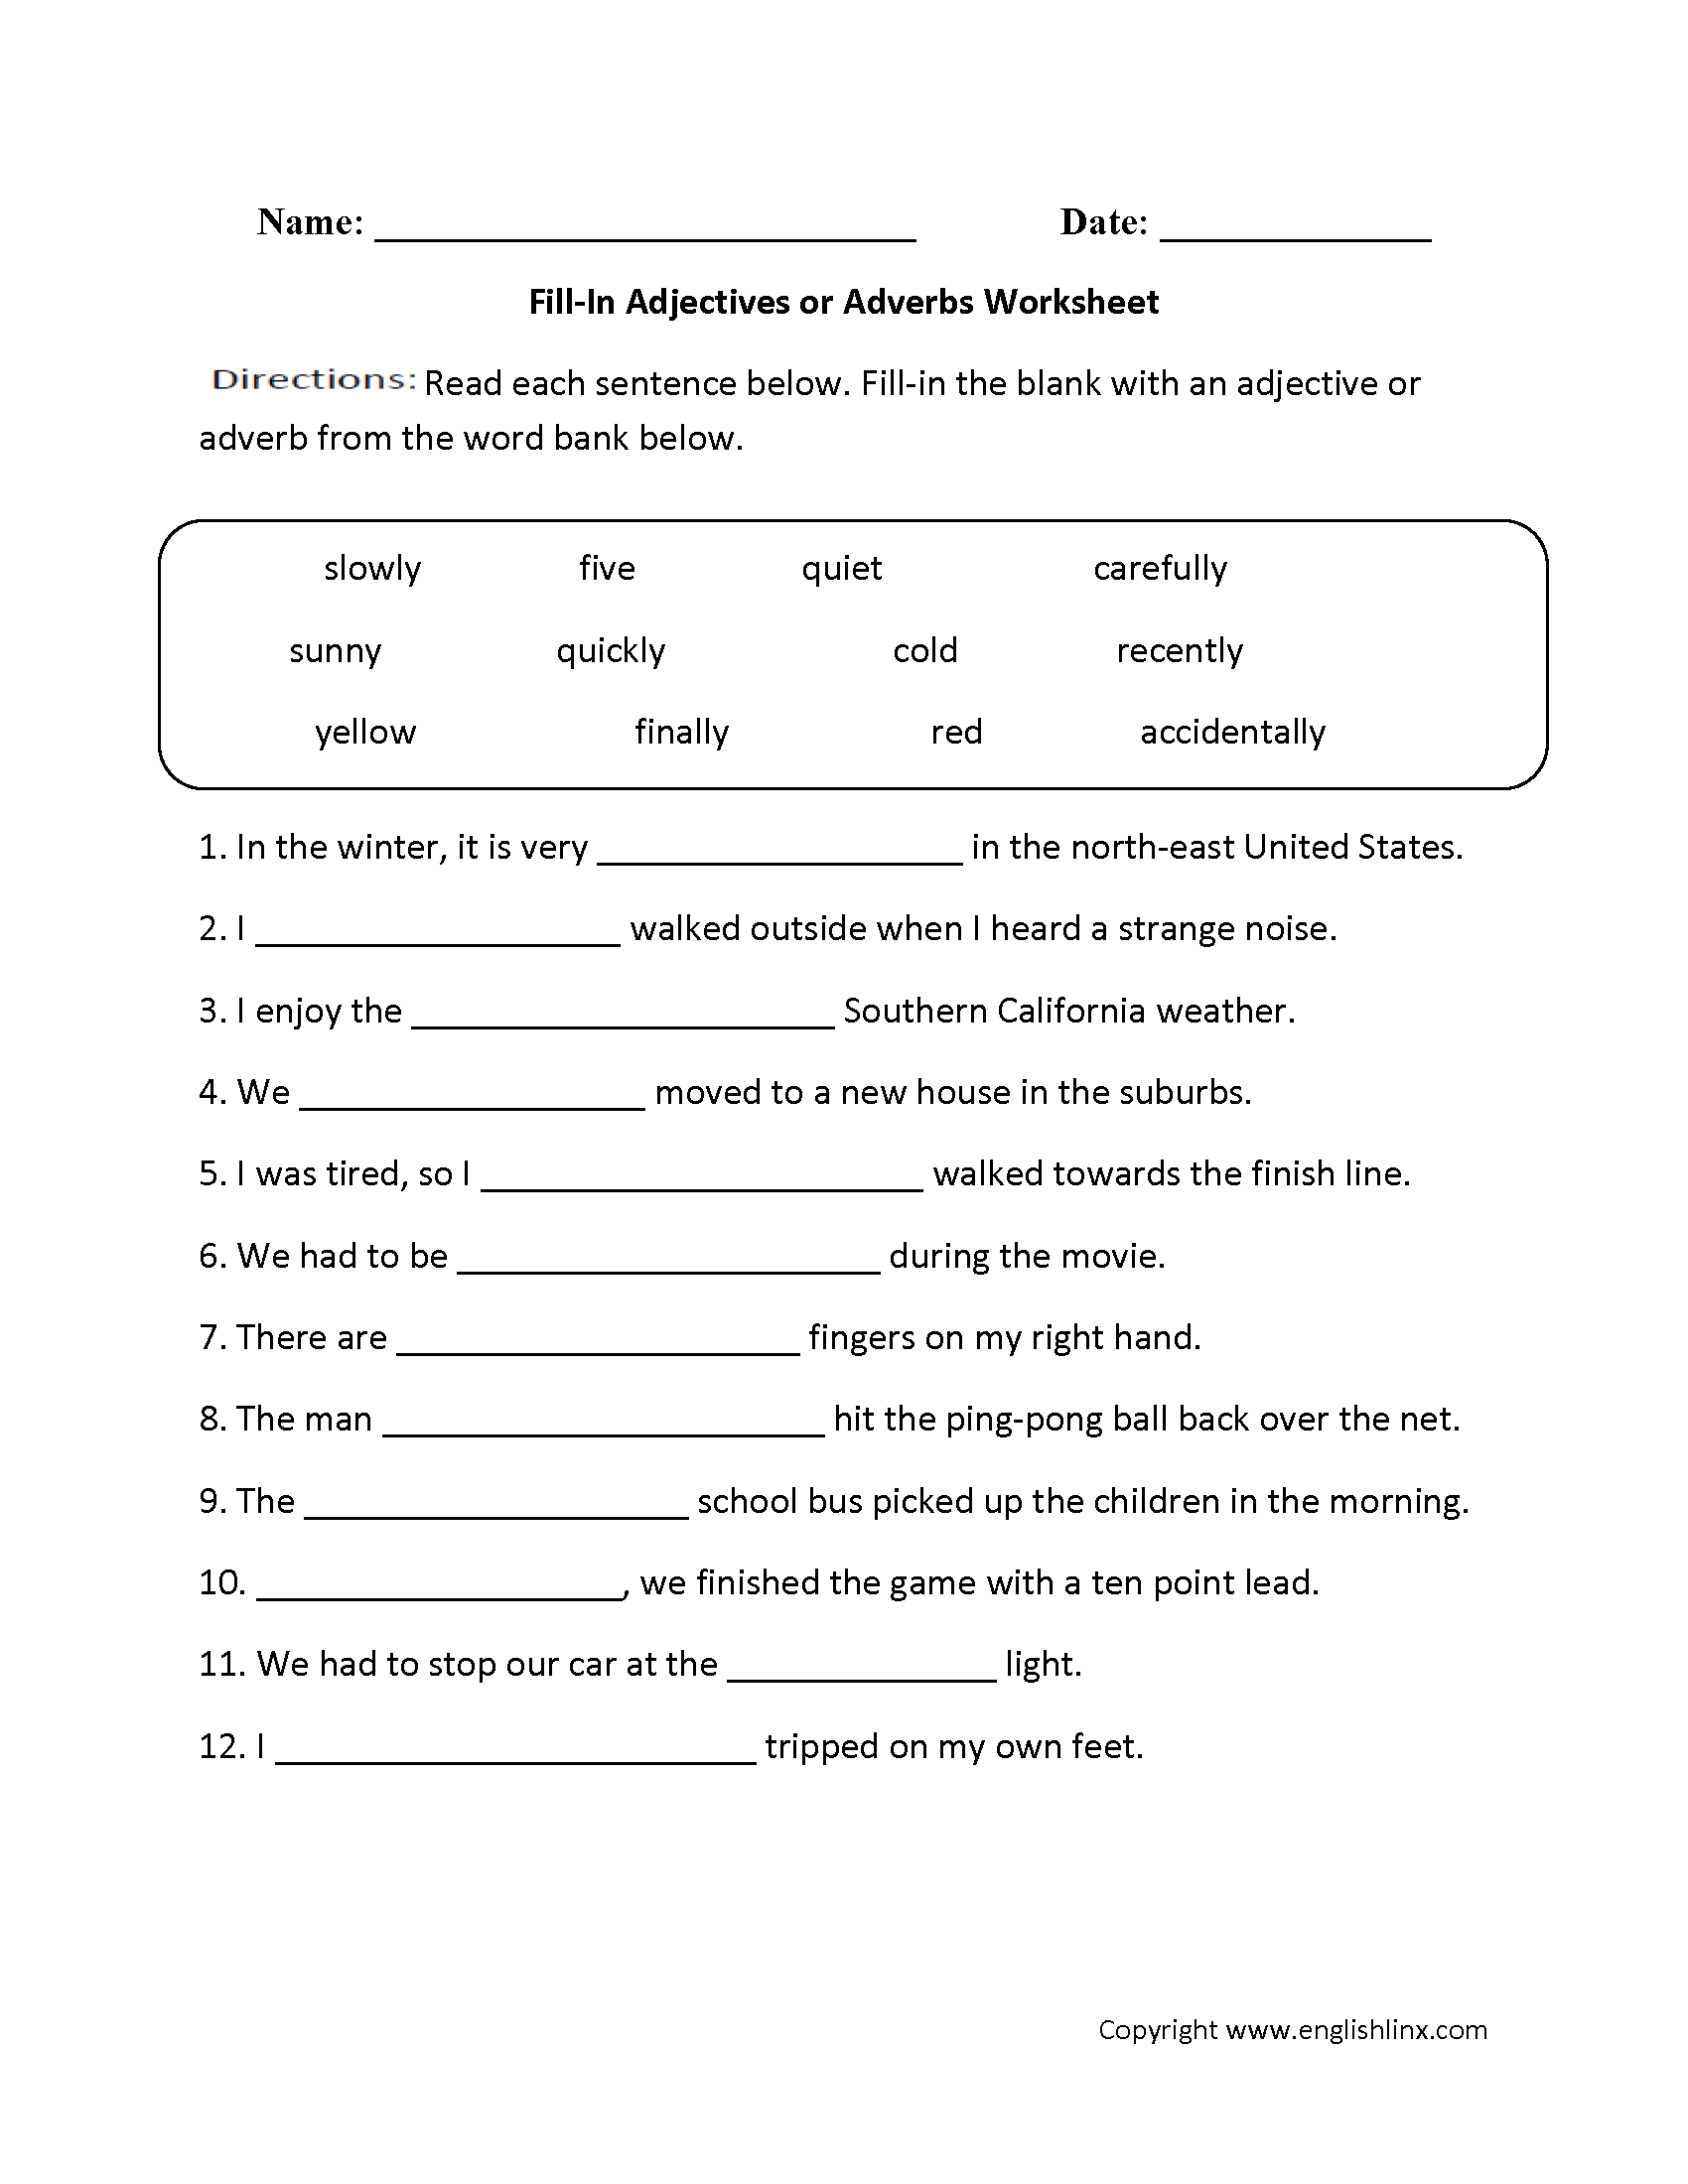 adjectives-worksheets-adjectives-or-adverbs-worksheets-db-excel